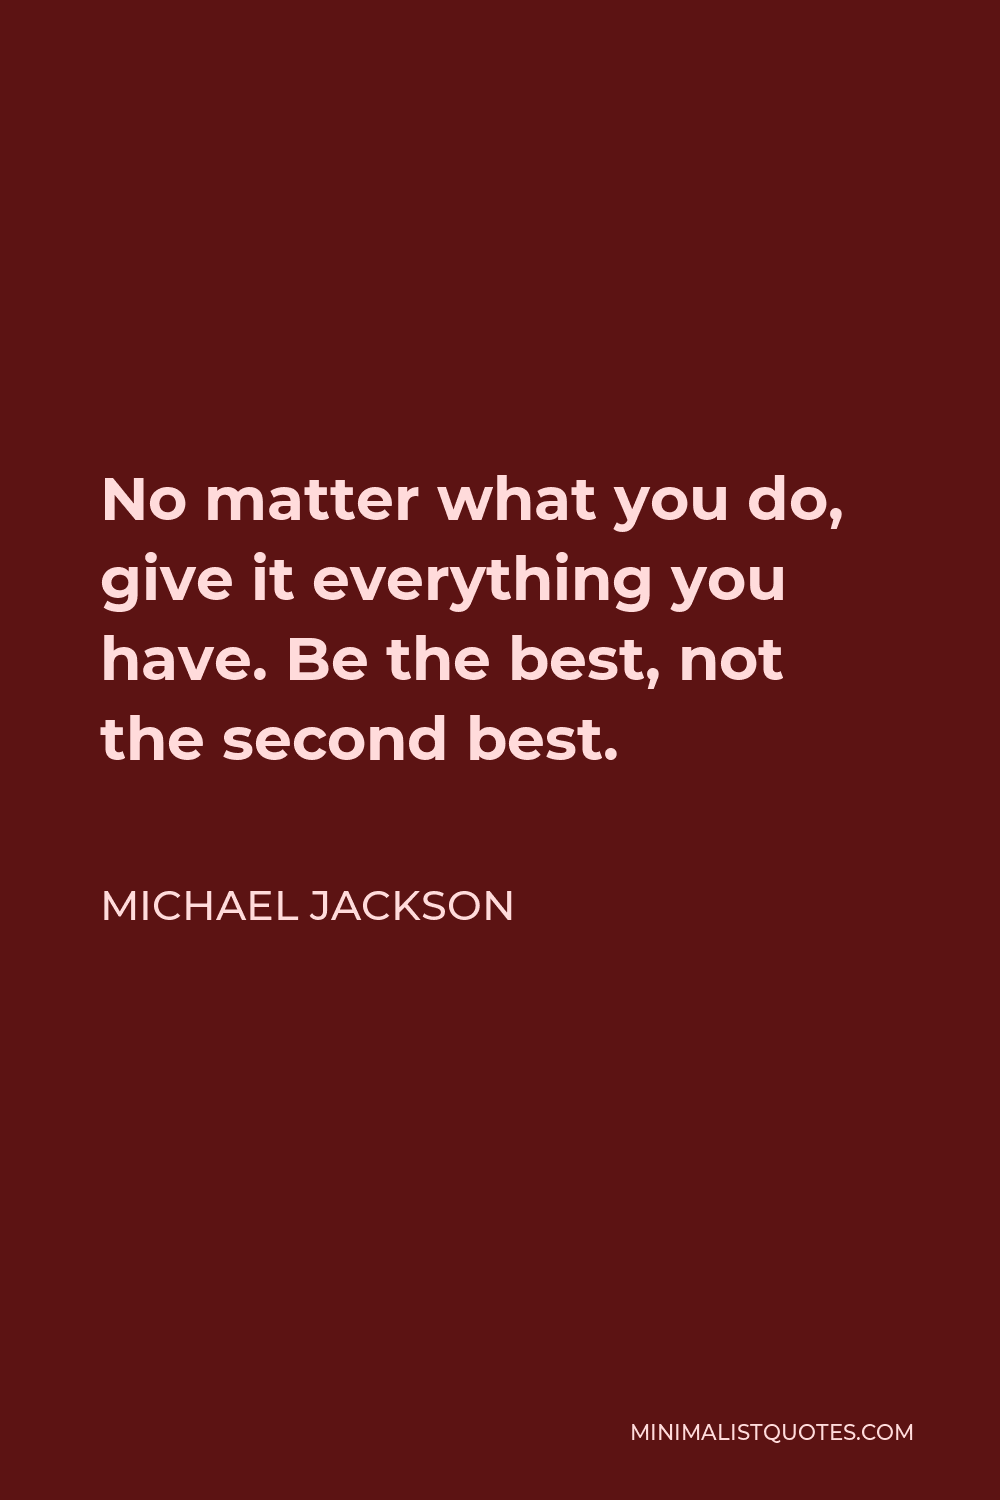 Michael Jackson Quote - No matter what you do, give it everything you have. Be the best, not the second best.